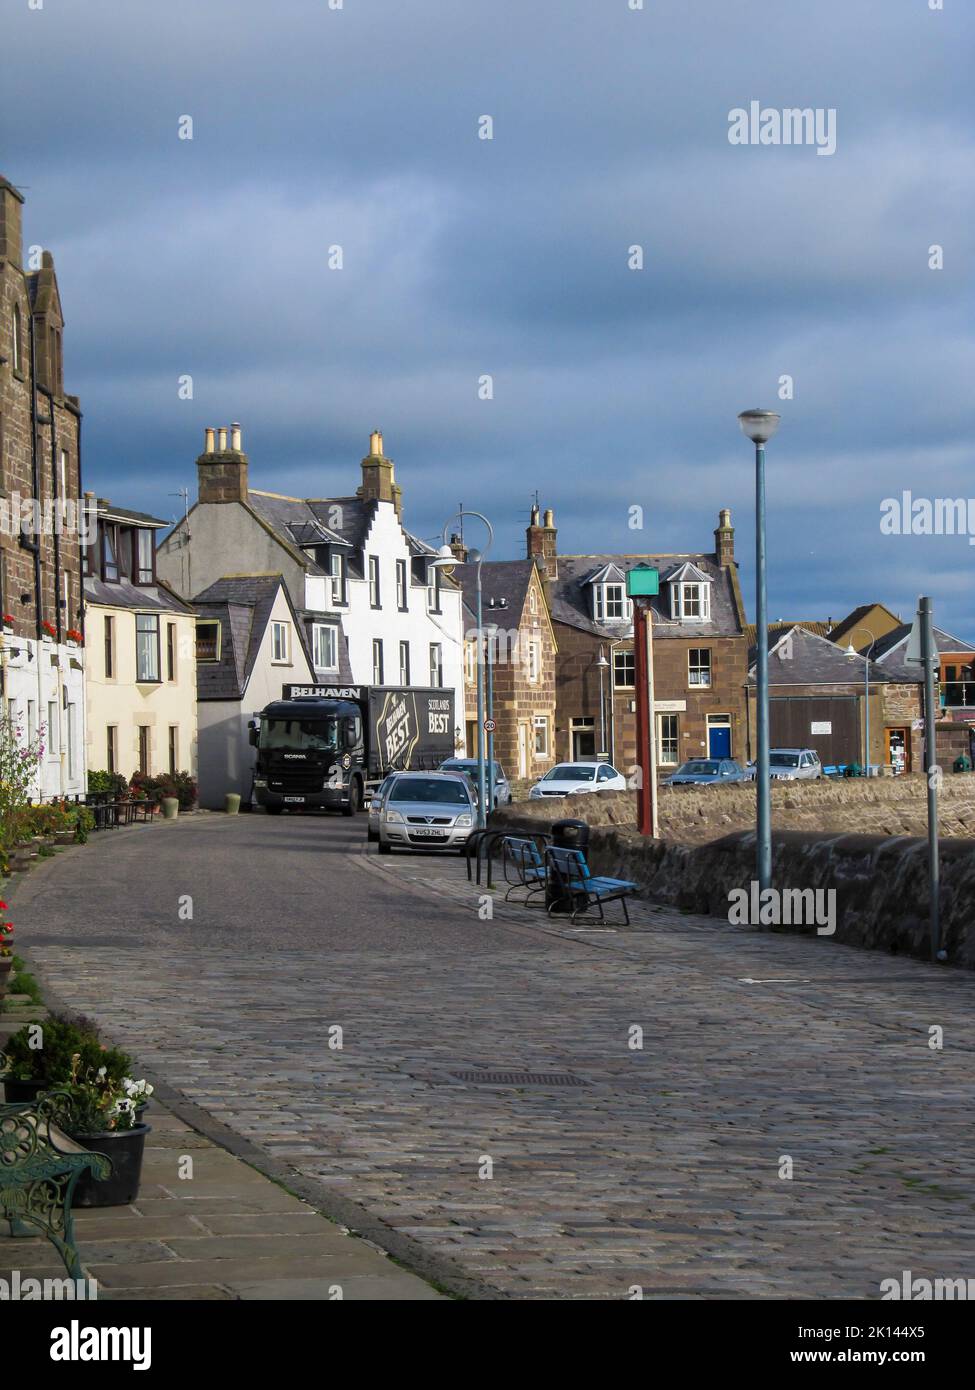 Cobblestone road in the morning, at the harbor of the small Scottish fishing village of Stonehaven, with ominous steel blue clouds in the background. Stock Photo